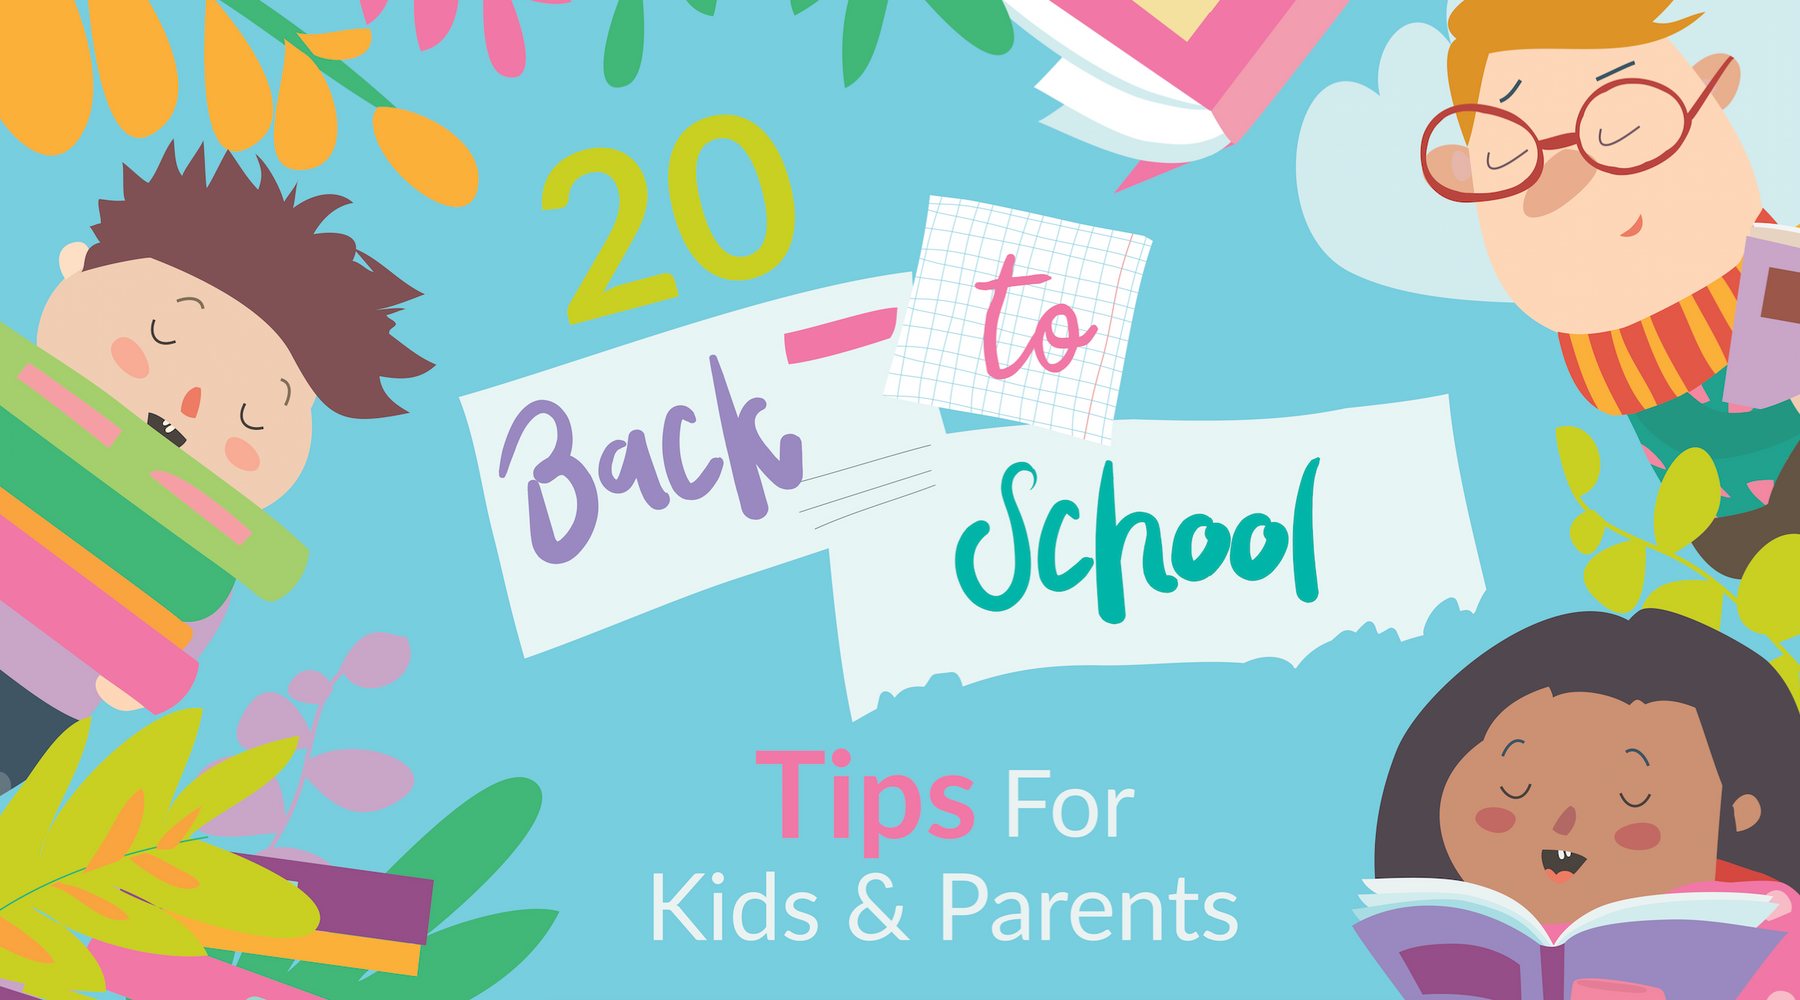 20 Back To School Tips For Kids & Parents